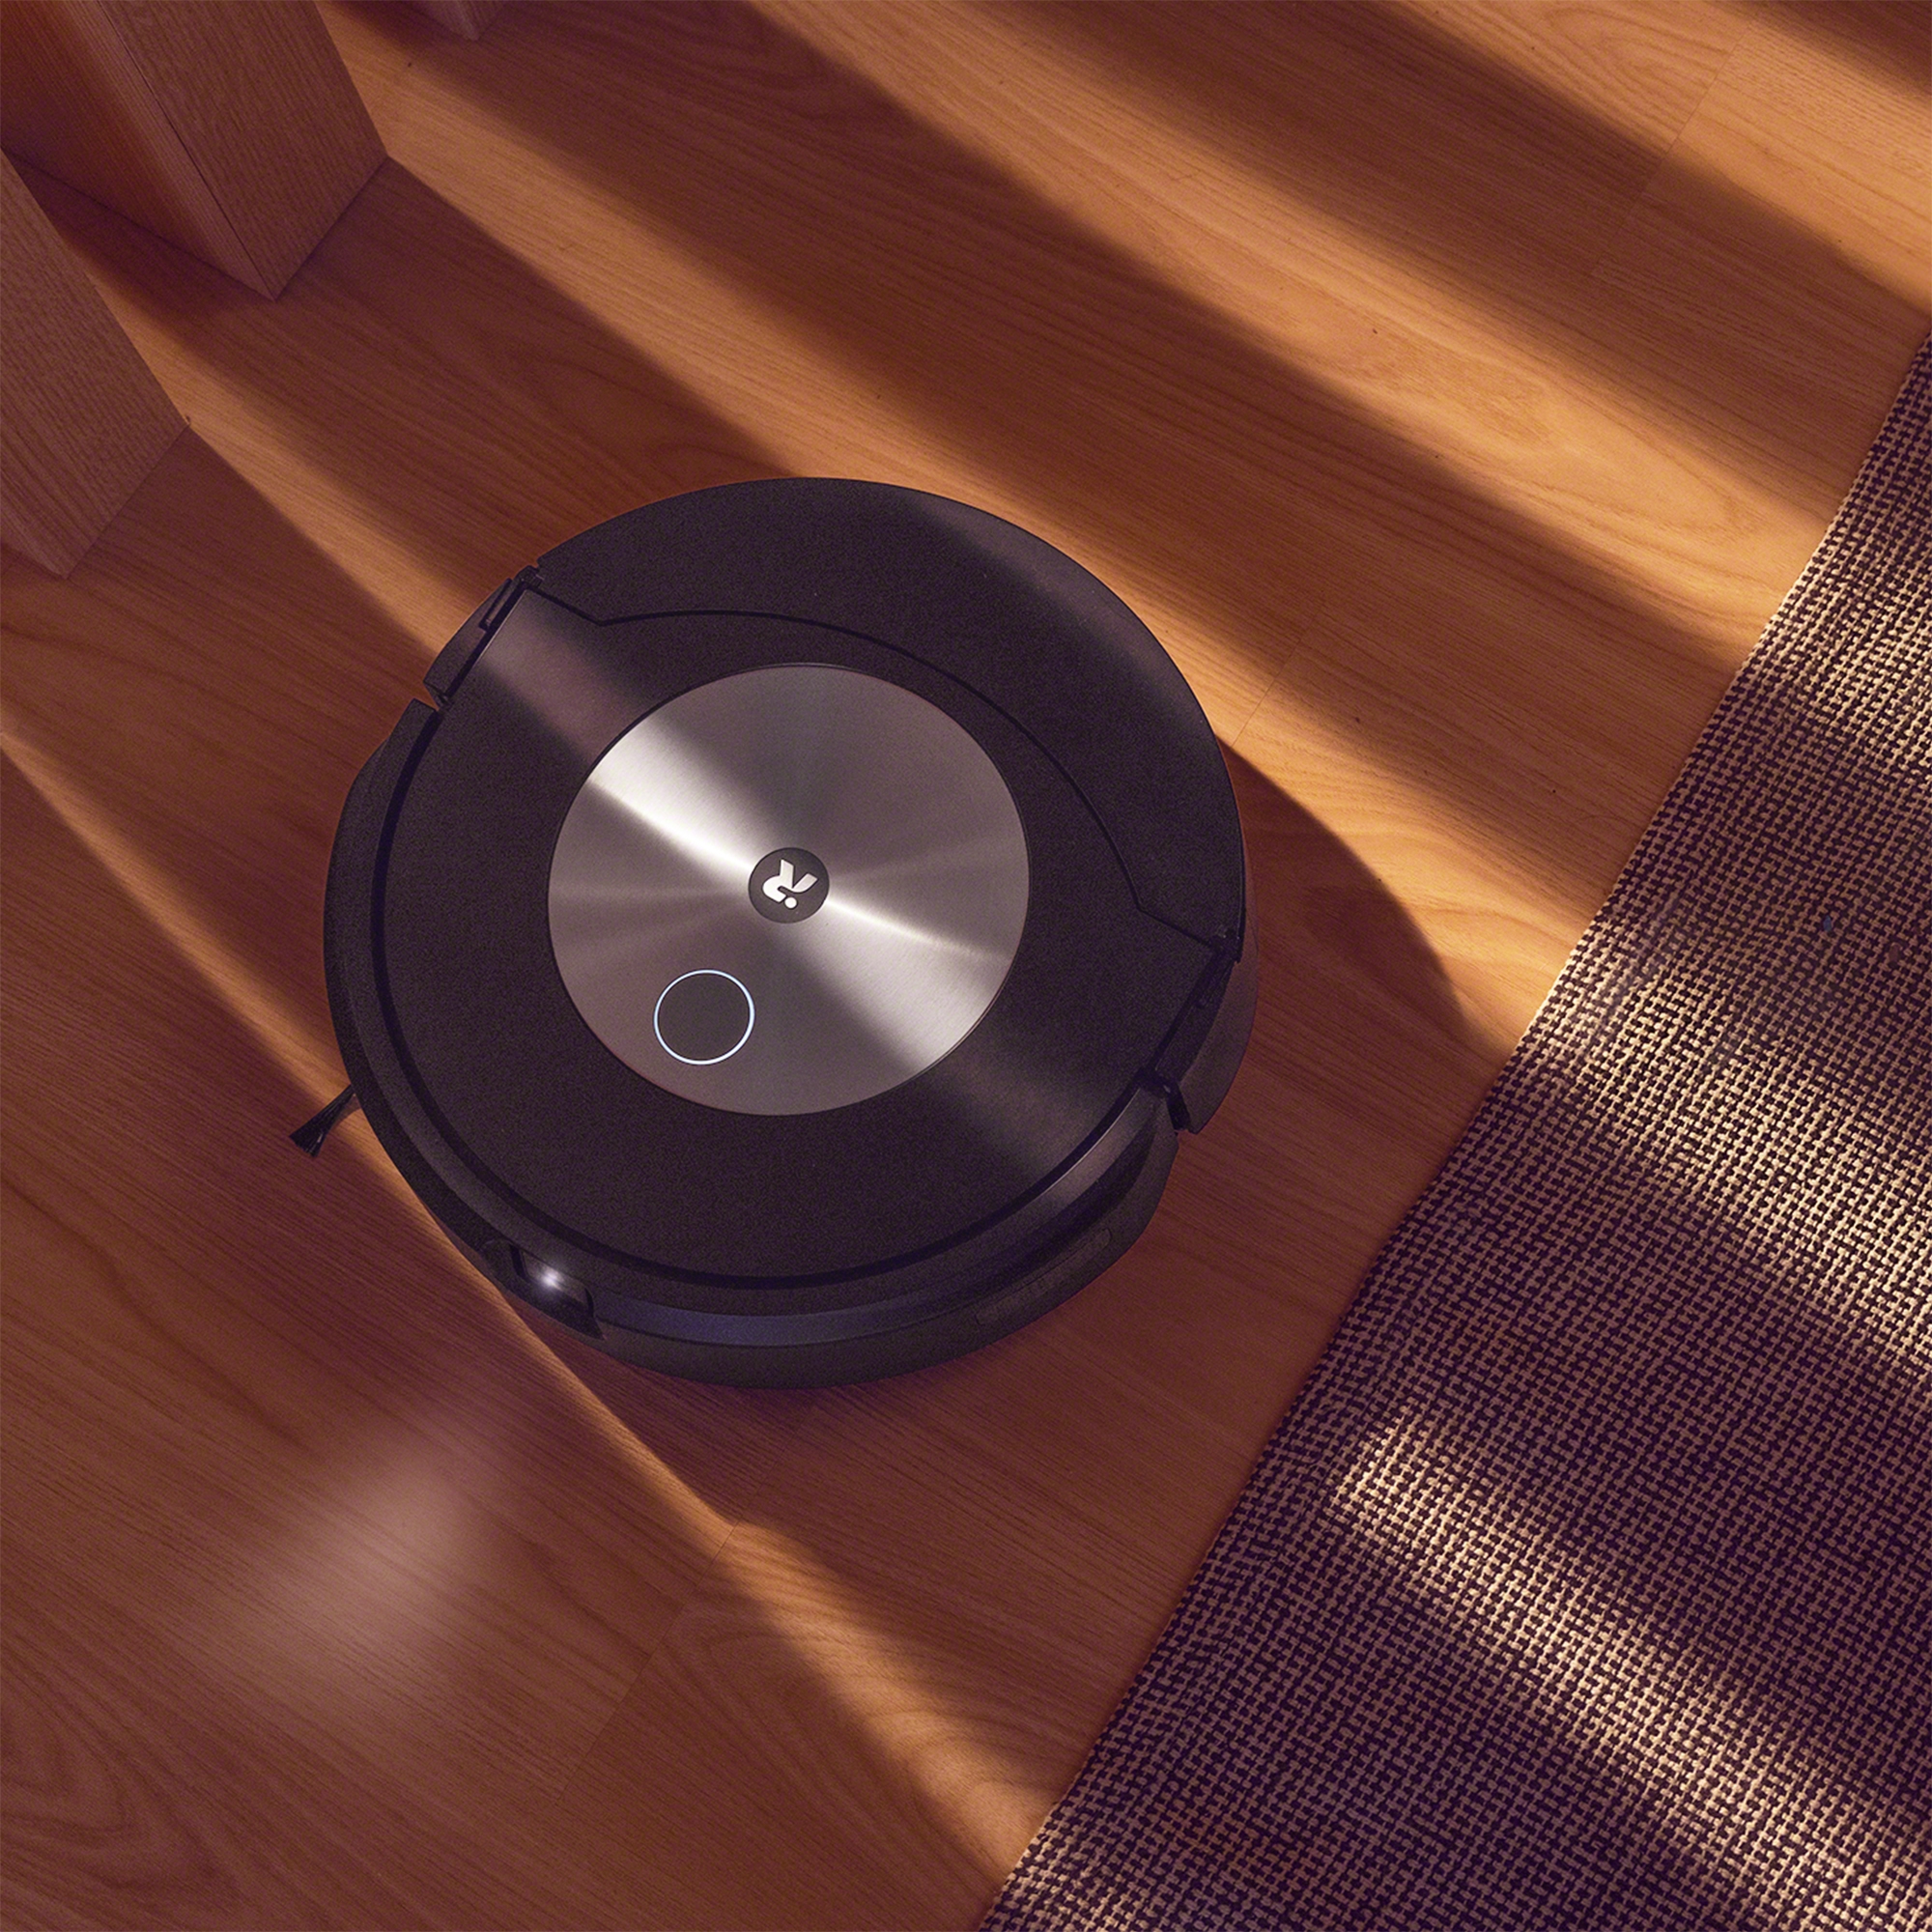 Finally, a Roomba that vacuums and mops thumbnail